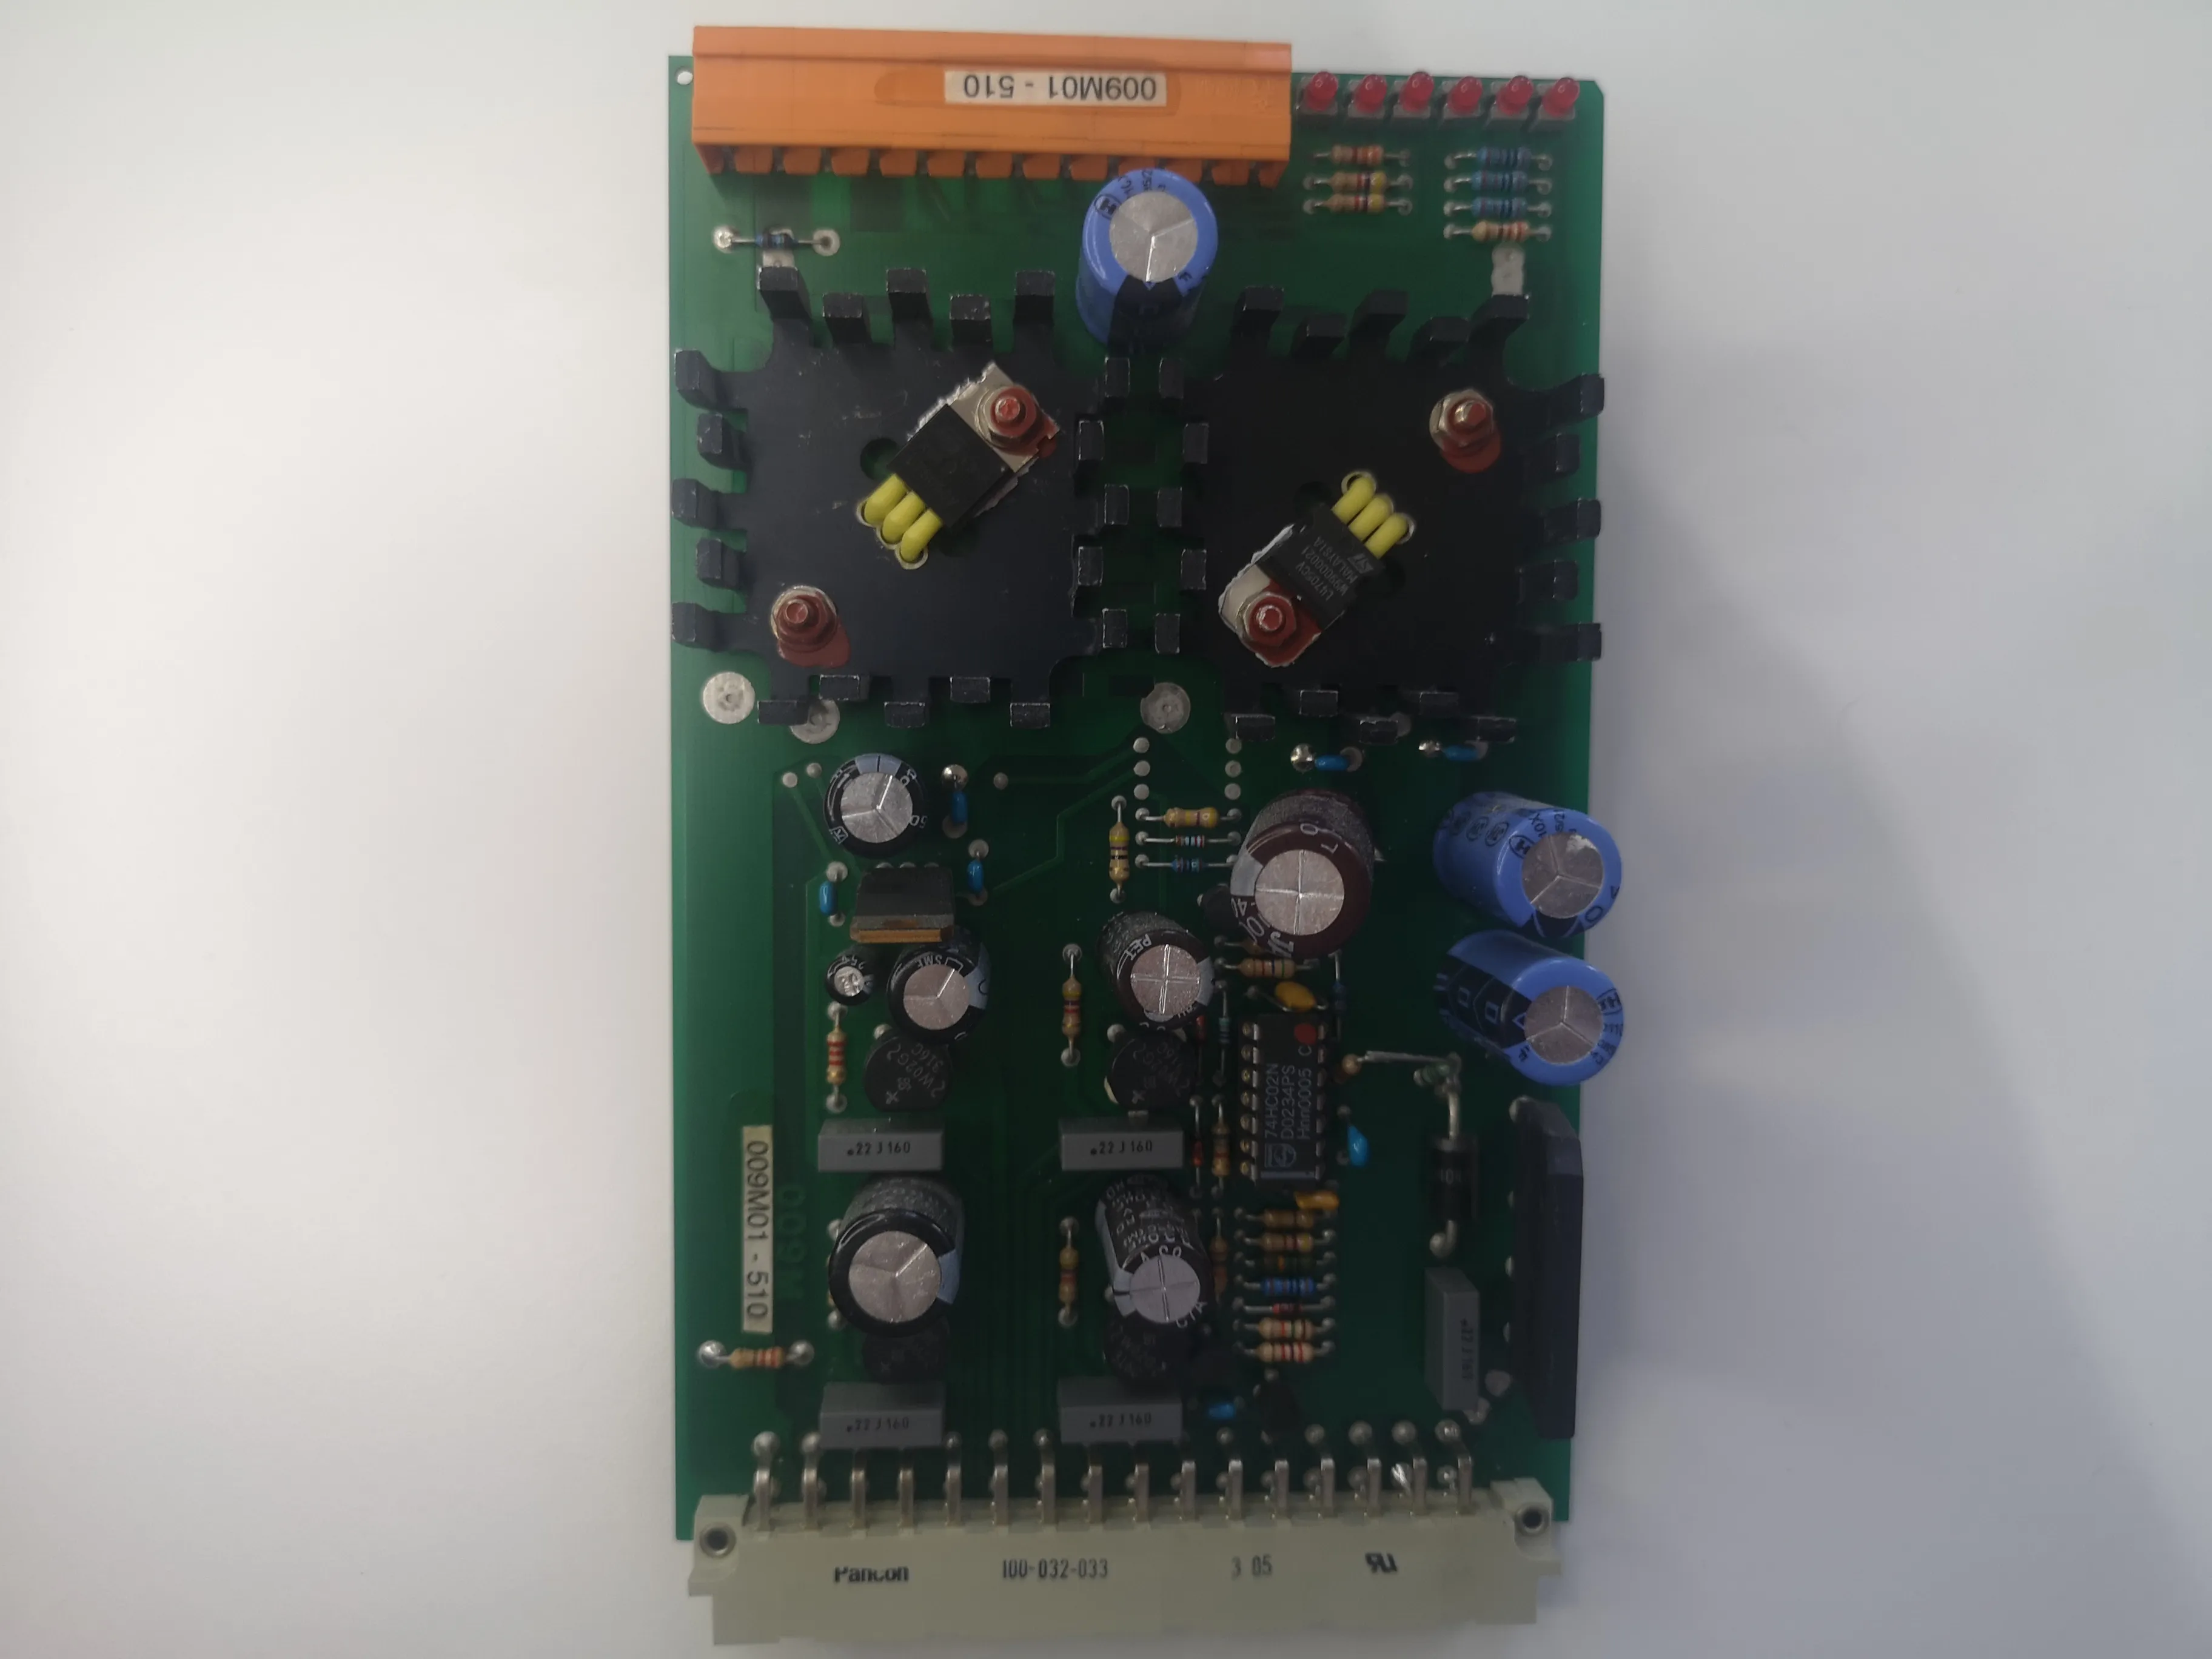 Image of the power board